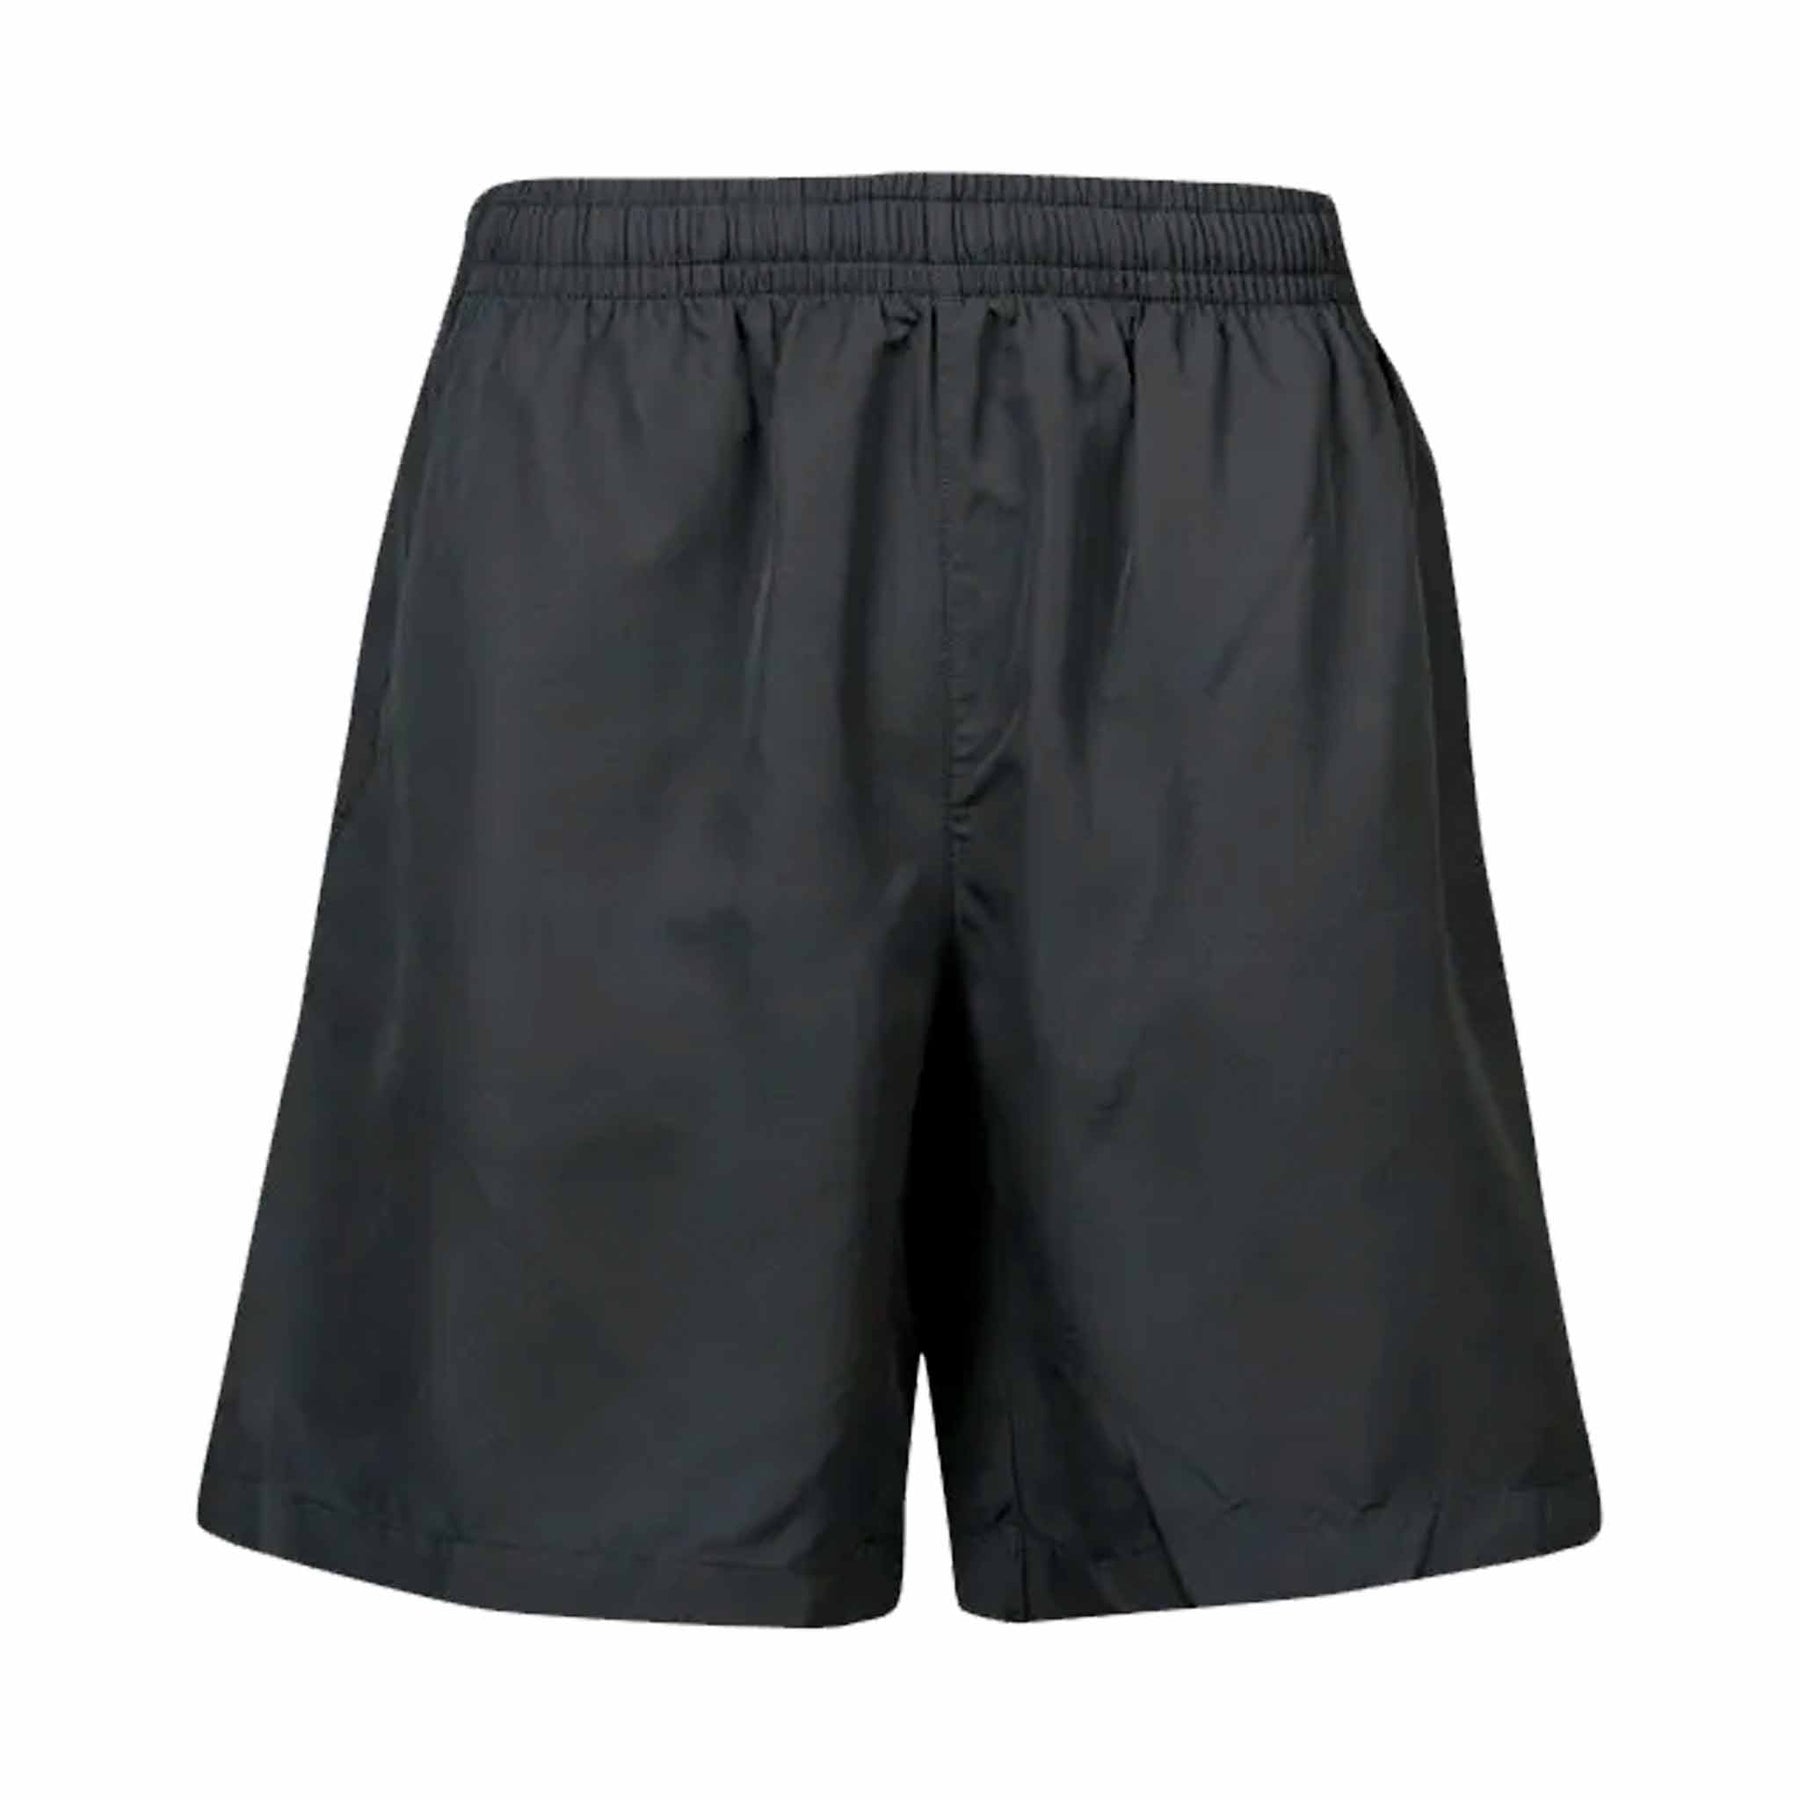 aussie pacific mens pongee shorts in black